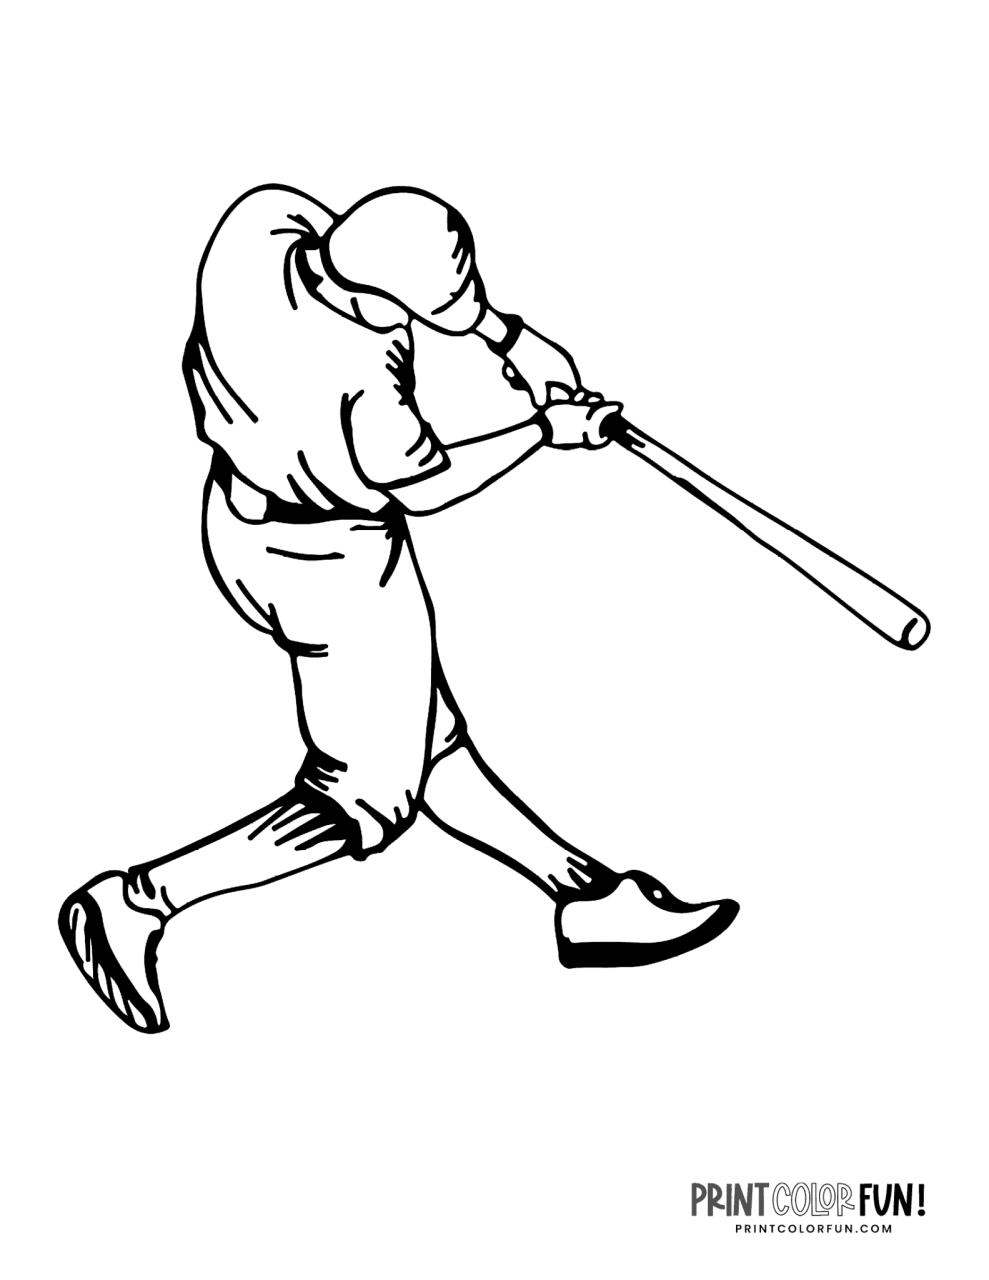 Coloring Pages Of Baseball